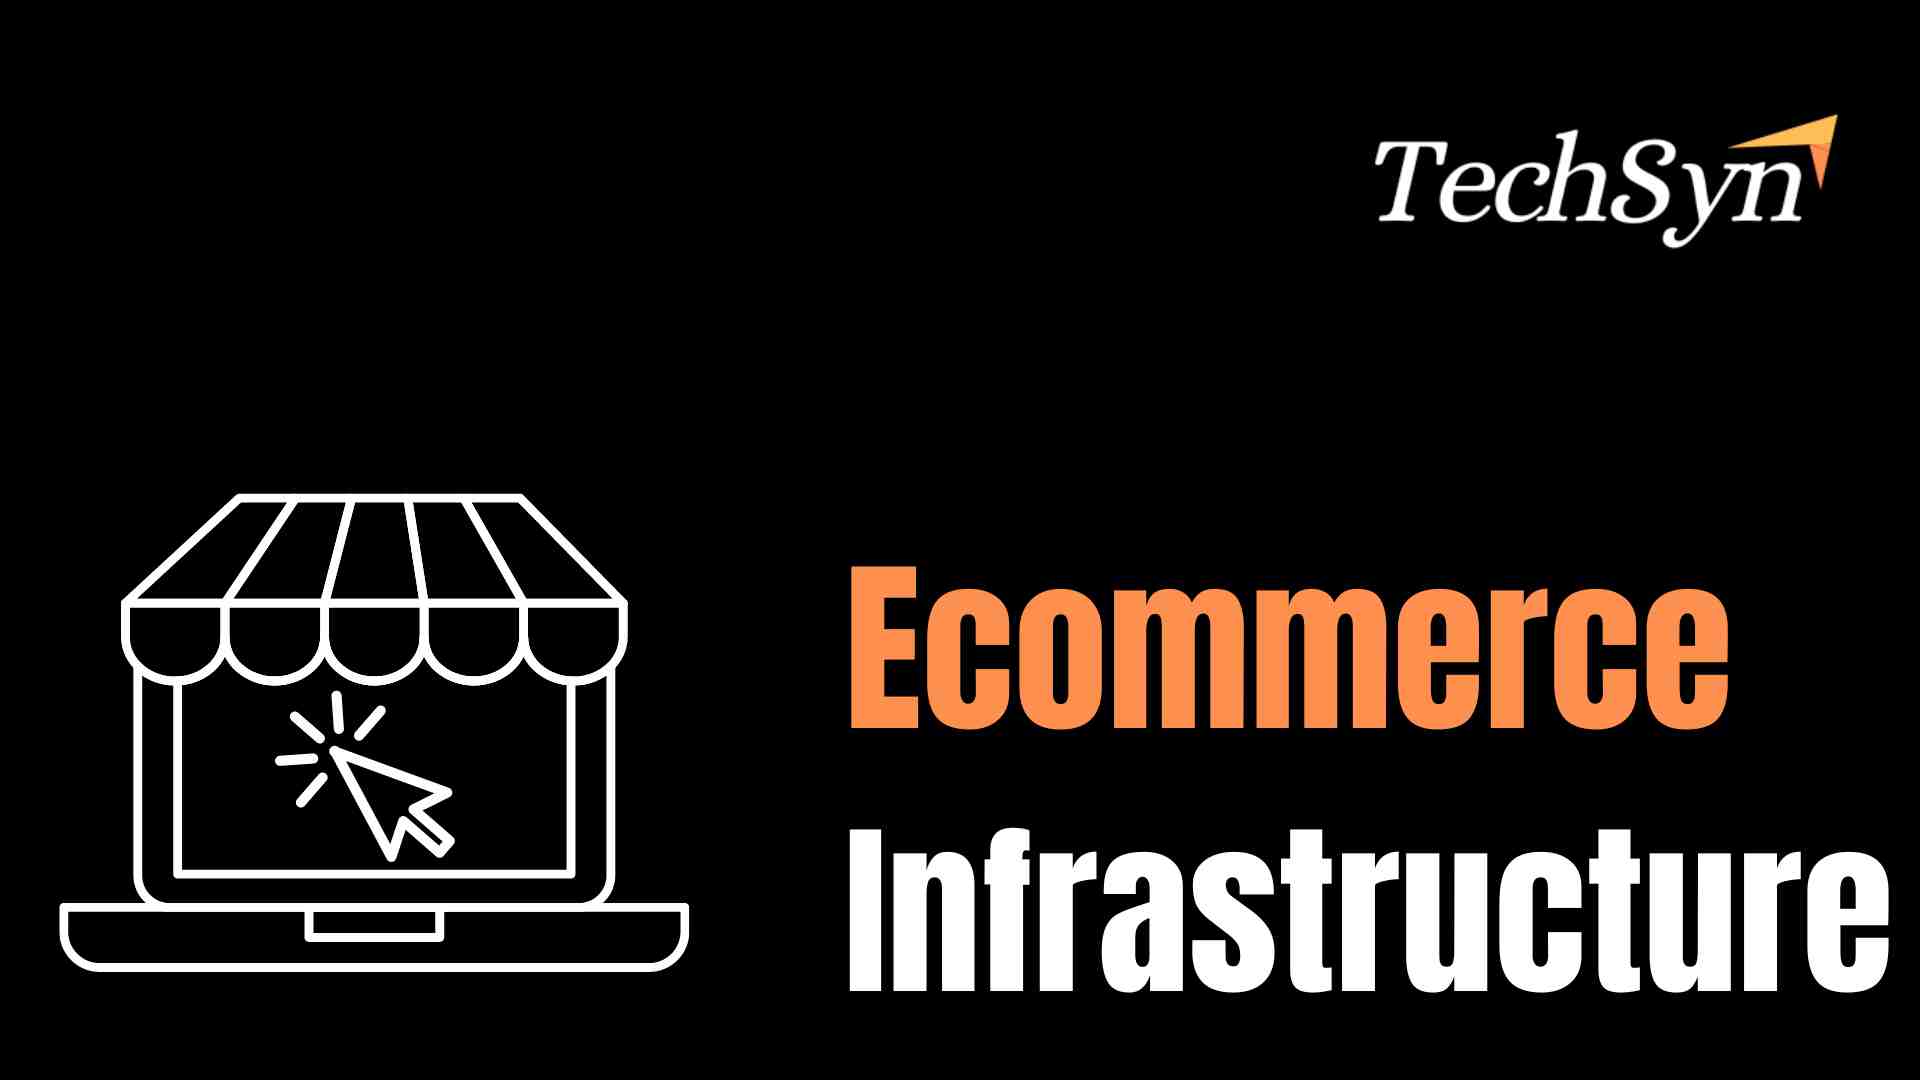 Techsyn Ecommerce Infrastructure